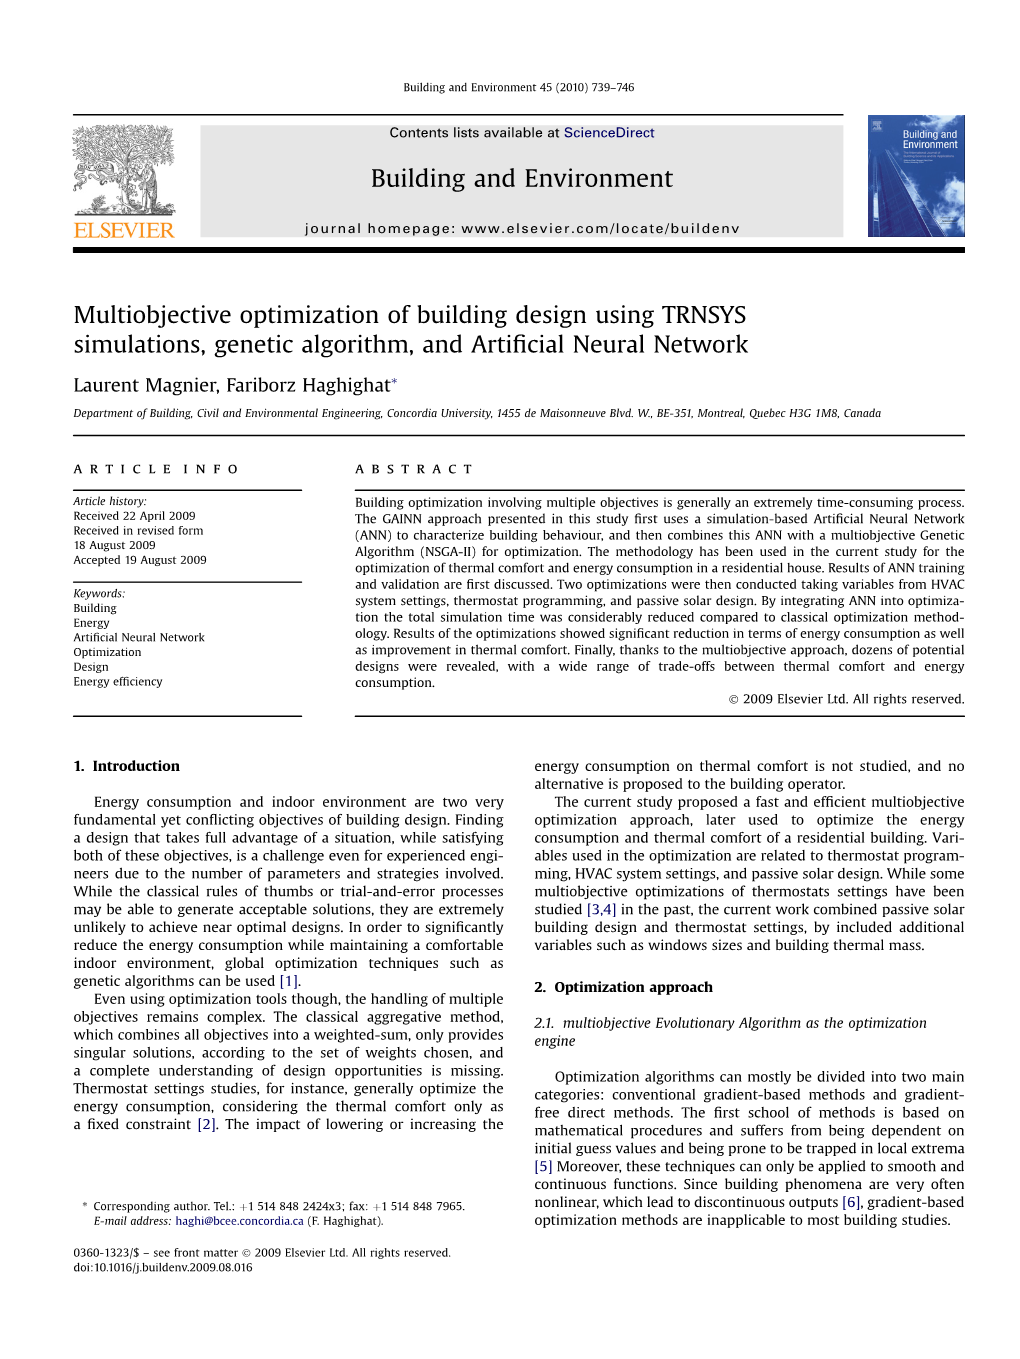 Multiobjective Optimization of Building Design Using TRNSYS Simulations, Genetic Algorithm, and Artiﬁcial Neural Network